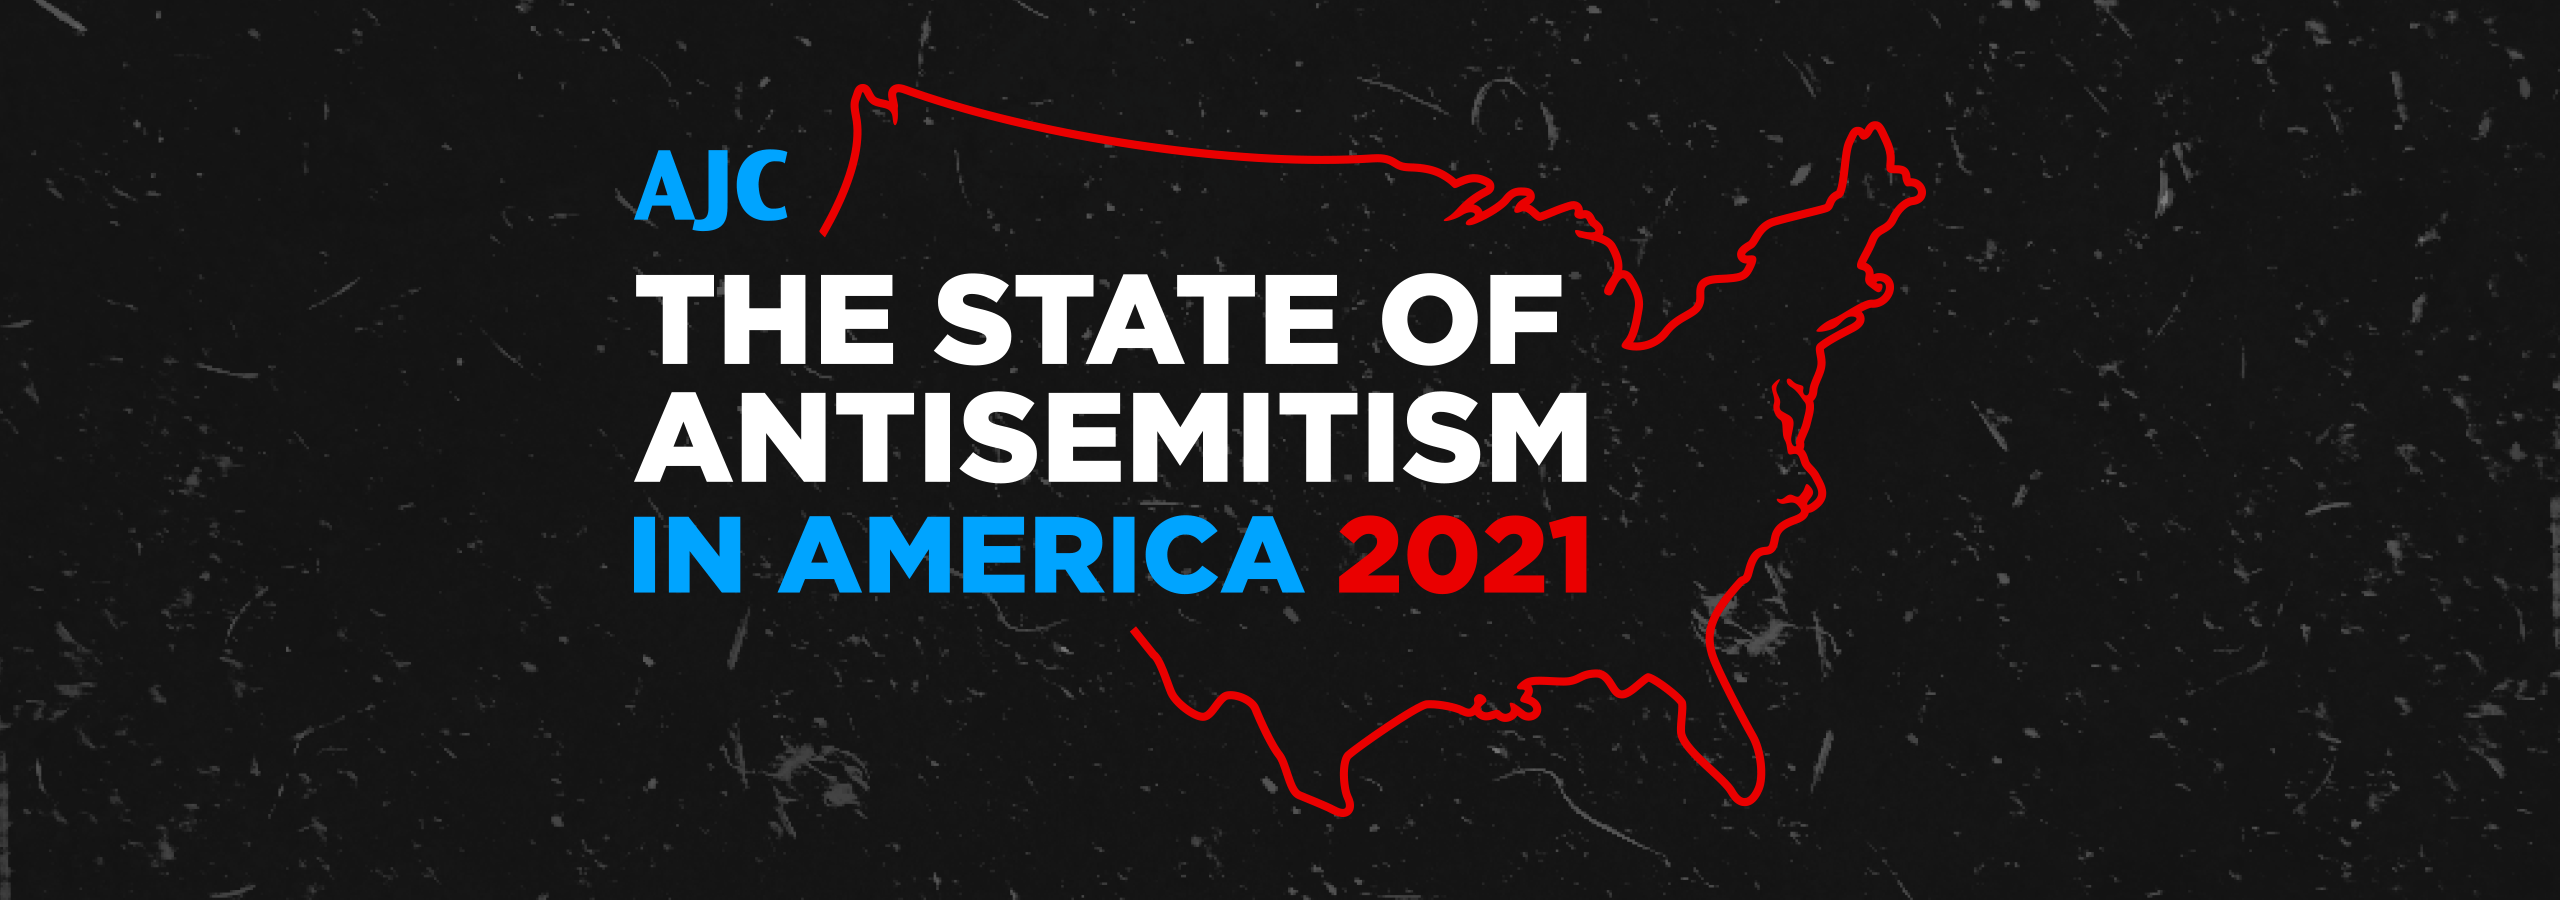 AJC's 2021 State of Antisemitism in America report